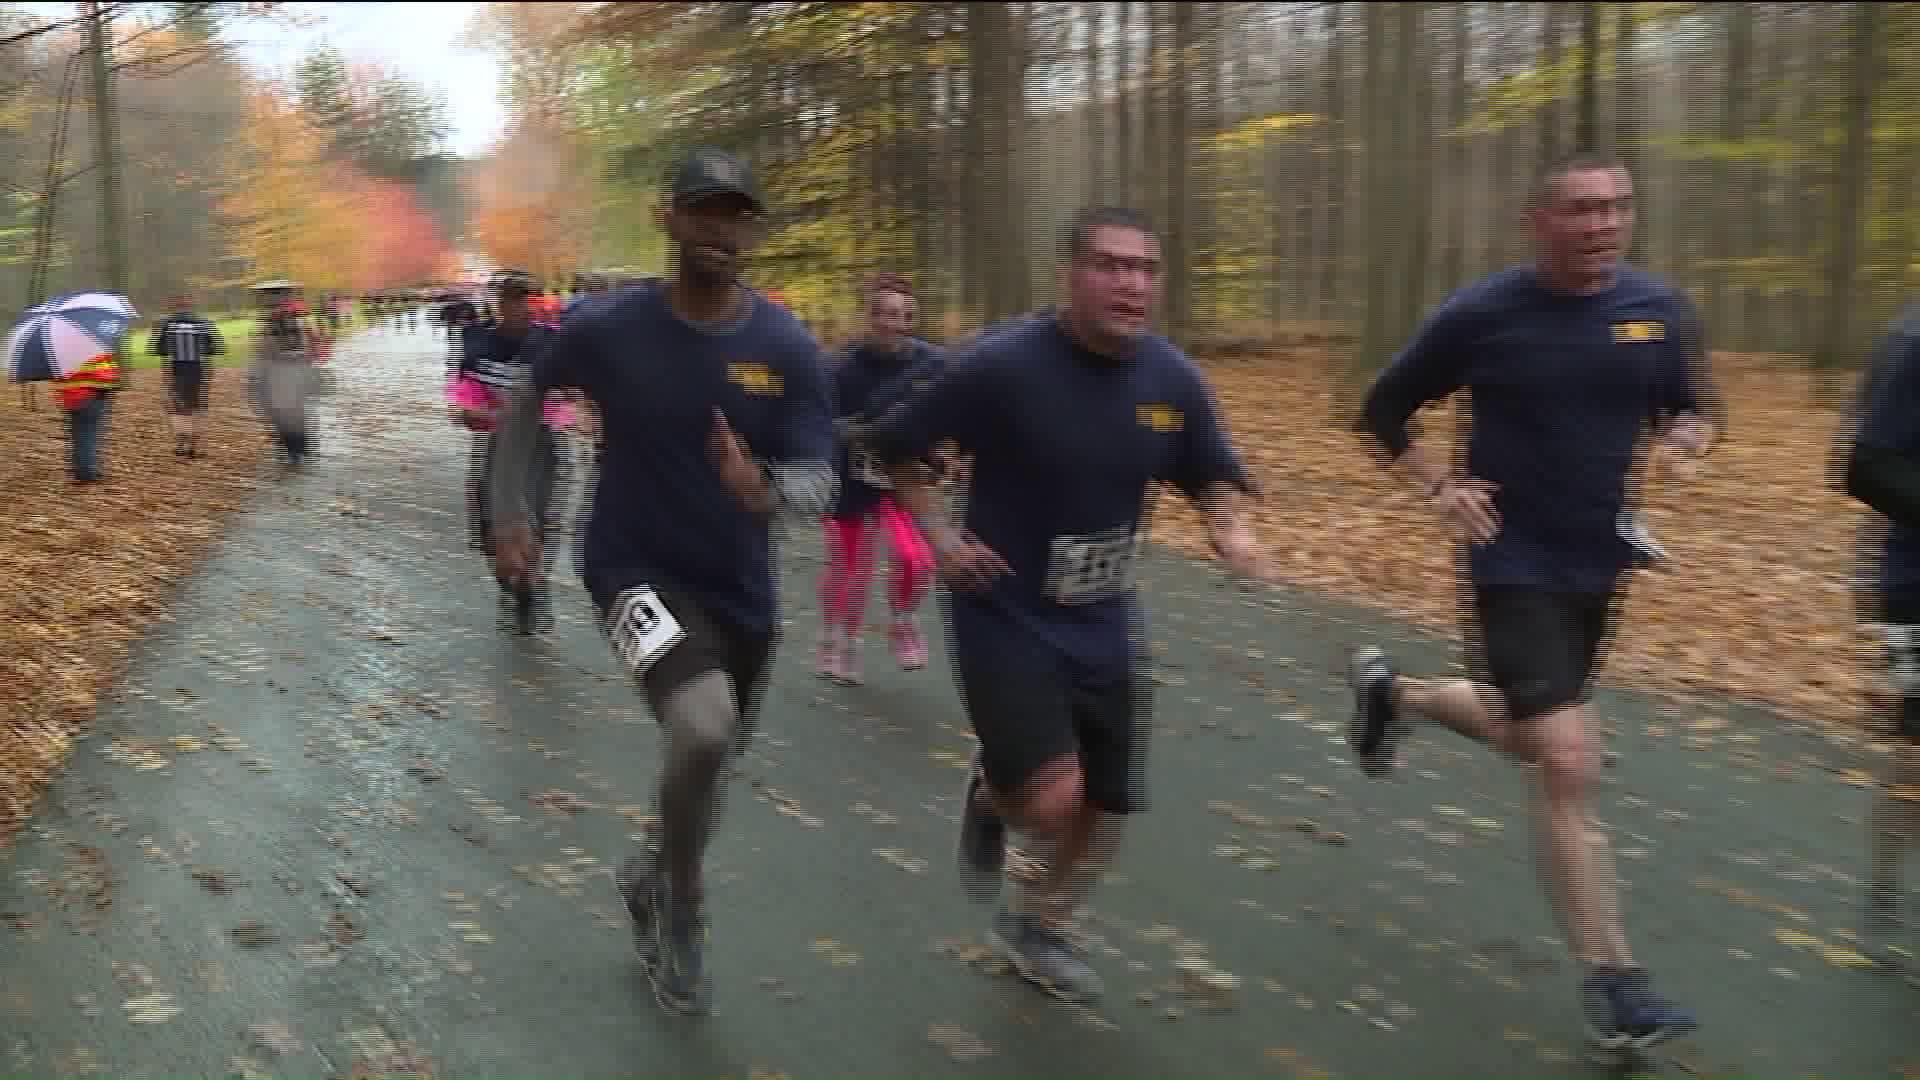 10th Annual CT Law Enforcement Officers Memorial Run held in Middletown